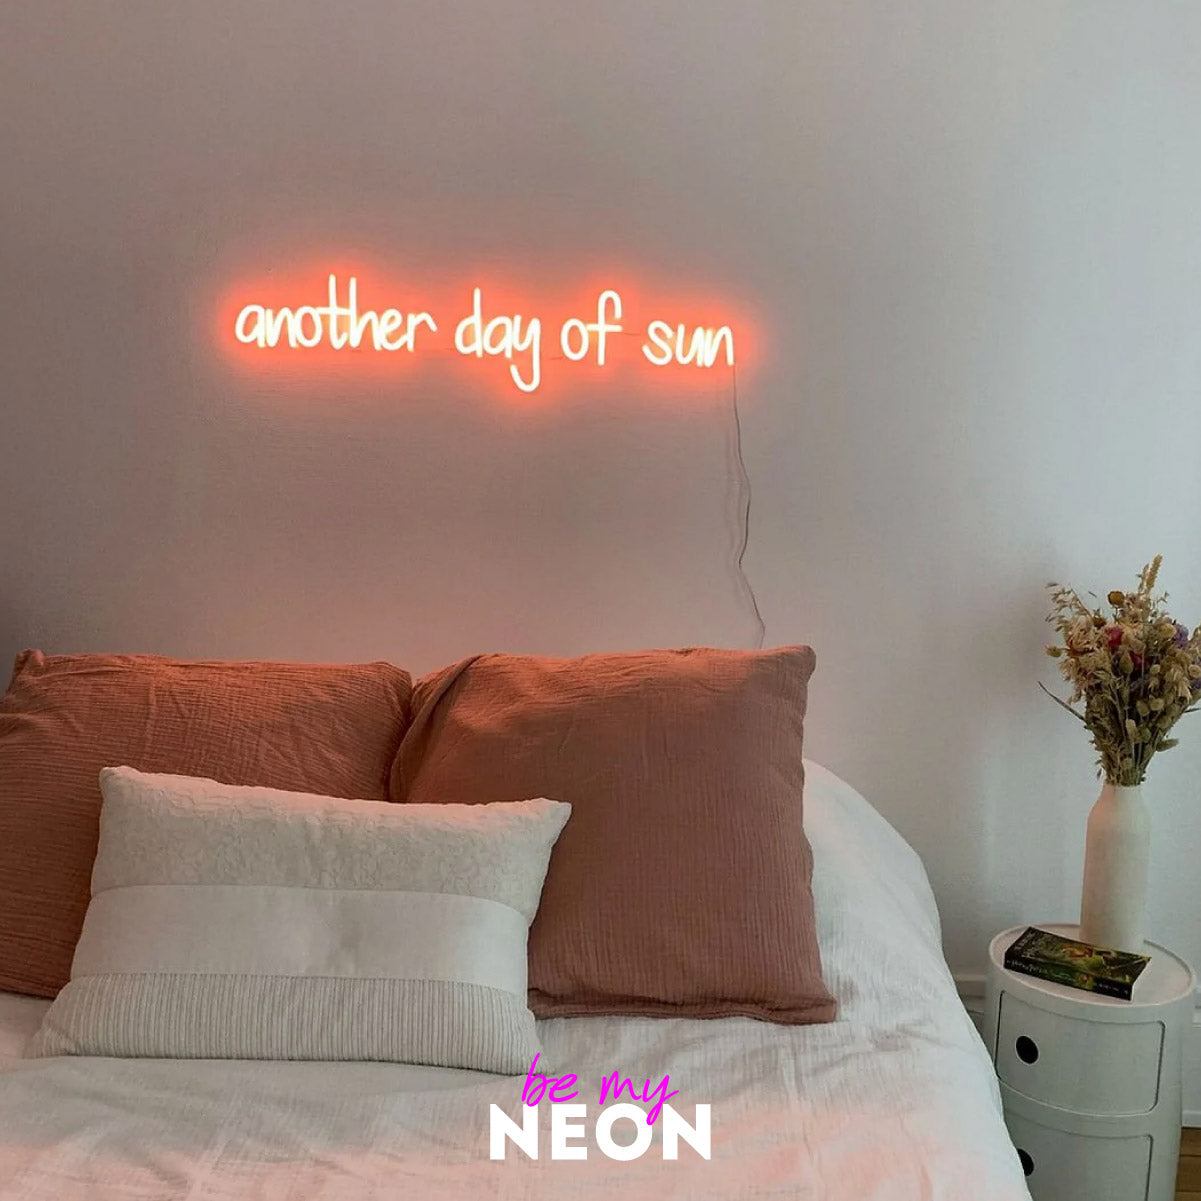 "another day of sun" Leuchtmotiv aus LED Neon